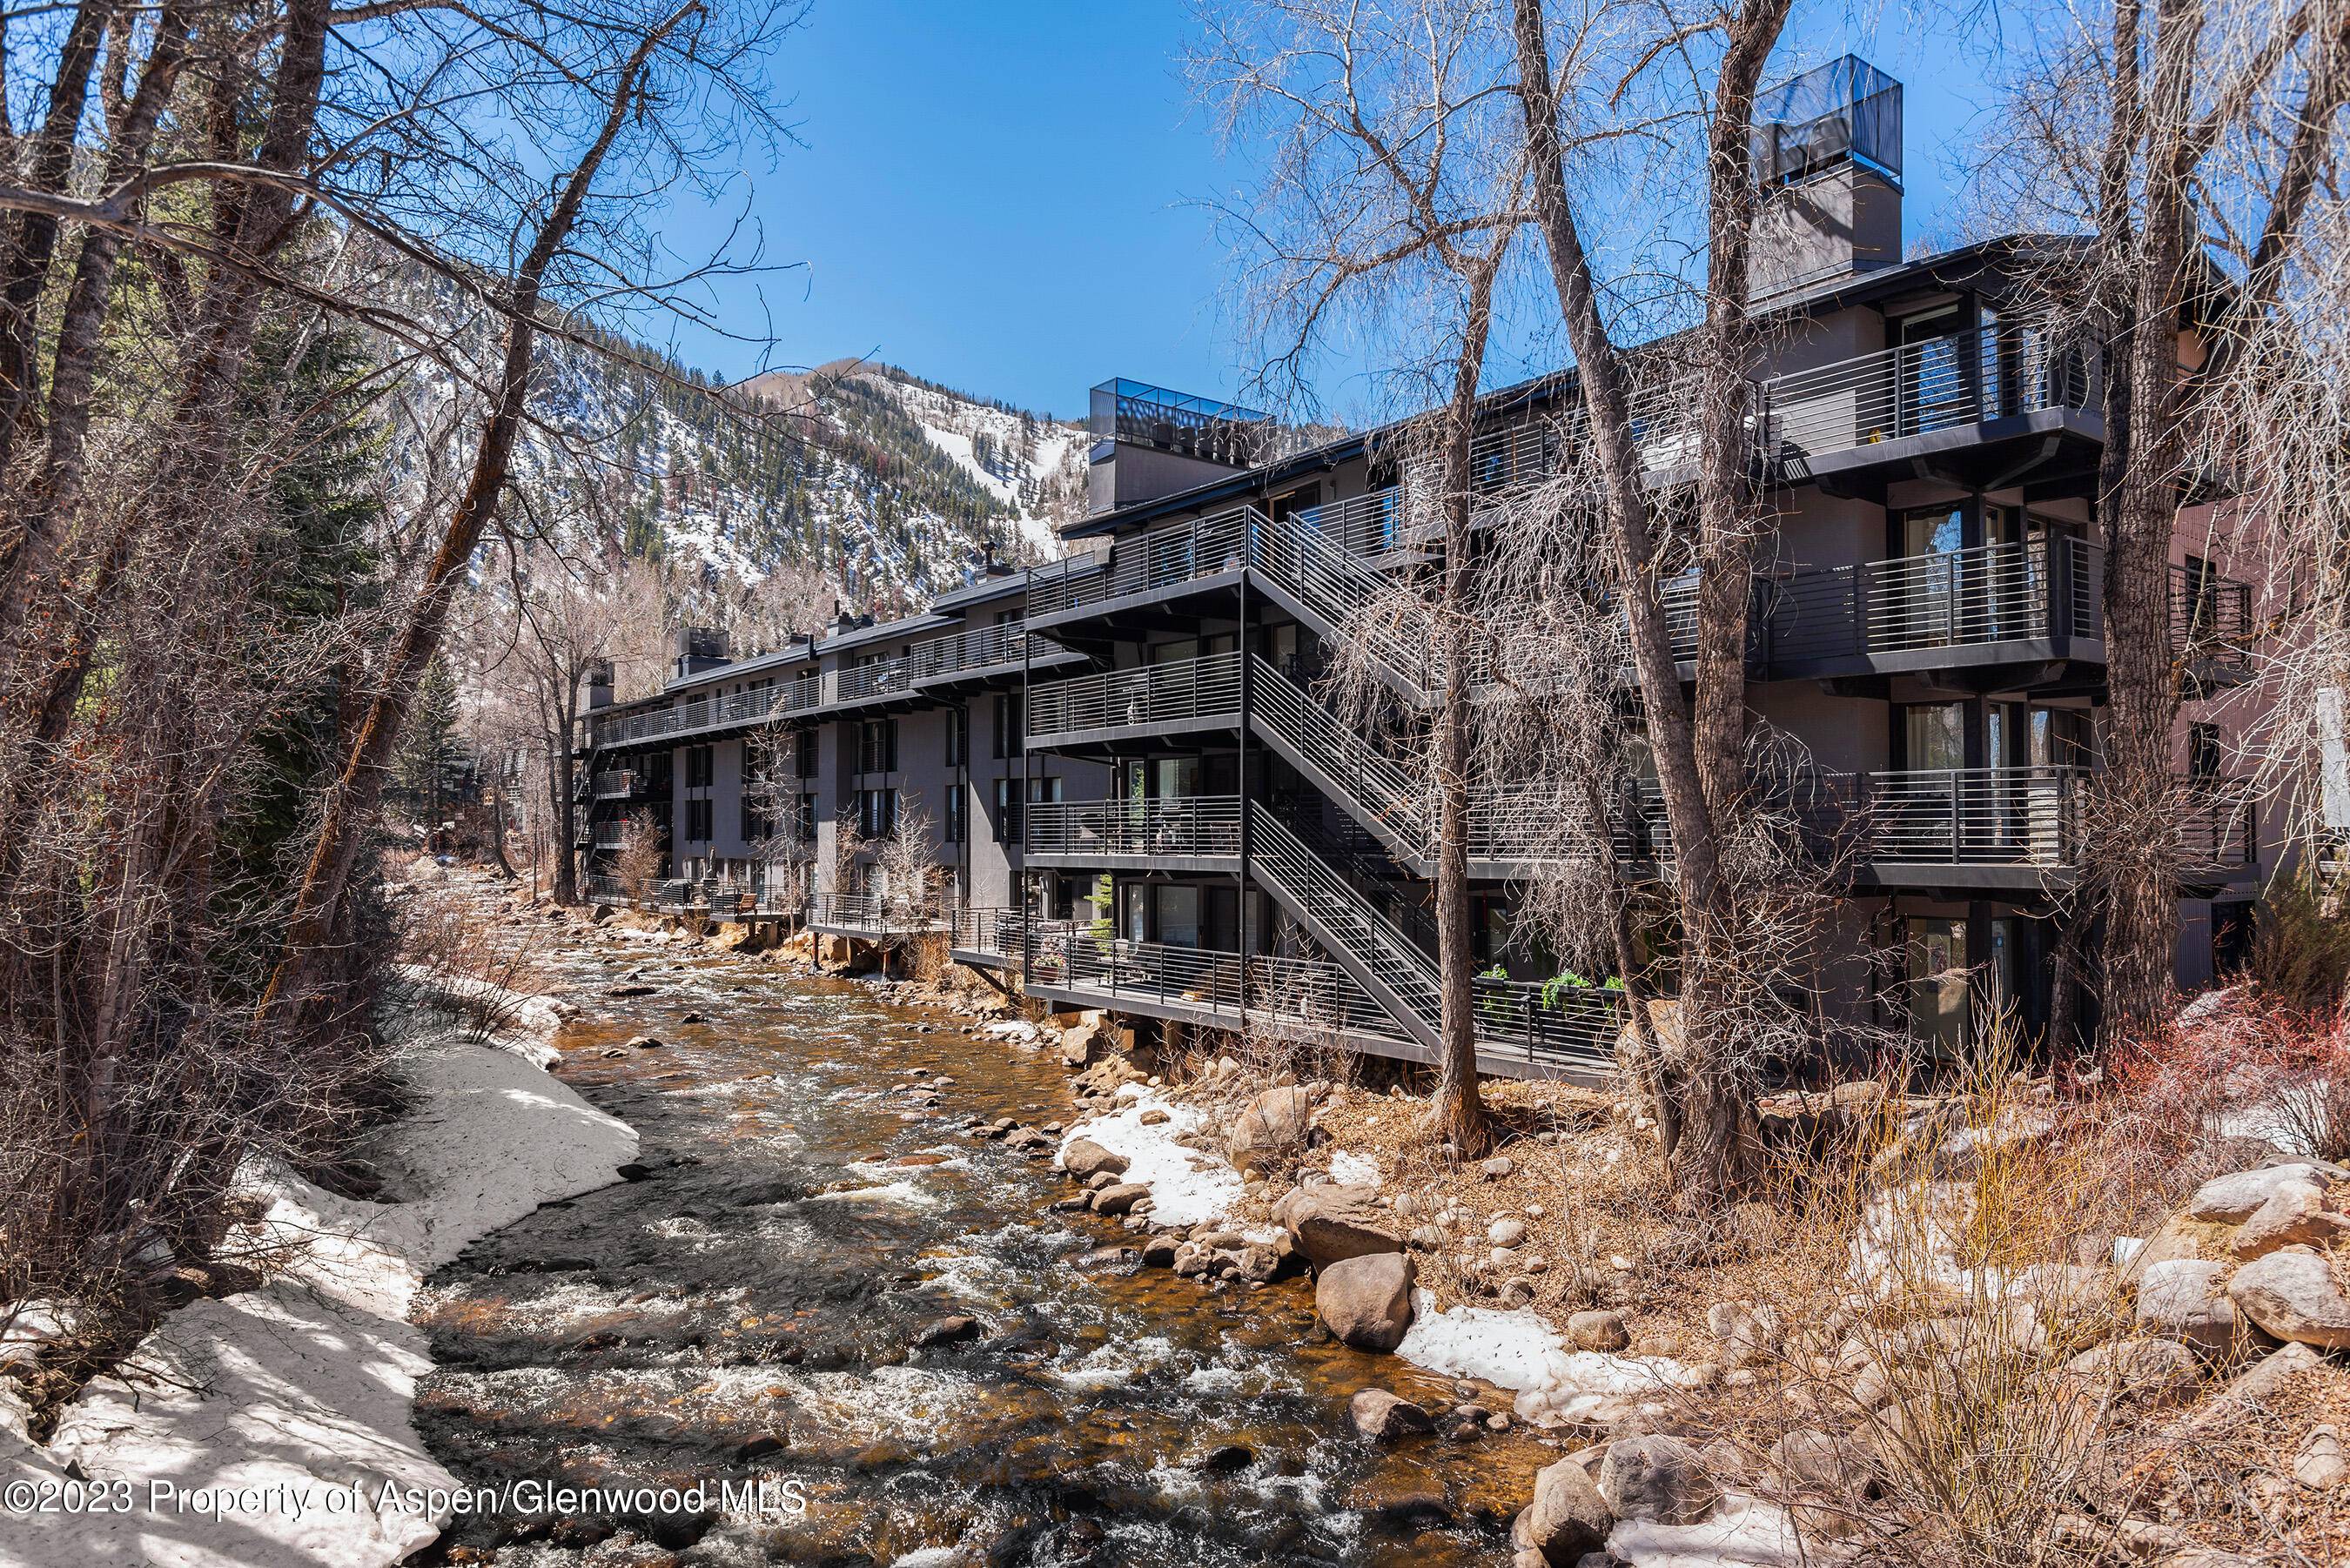 This beautiful four bedroom condo in the Core boasts amazing views of the roaring fork river.